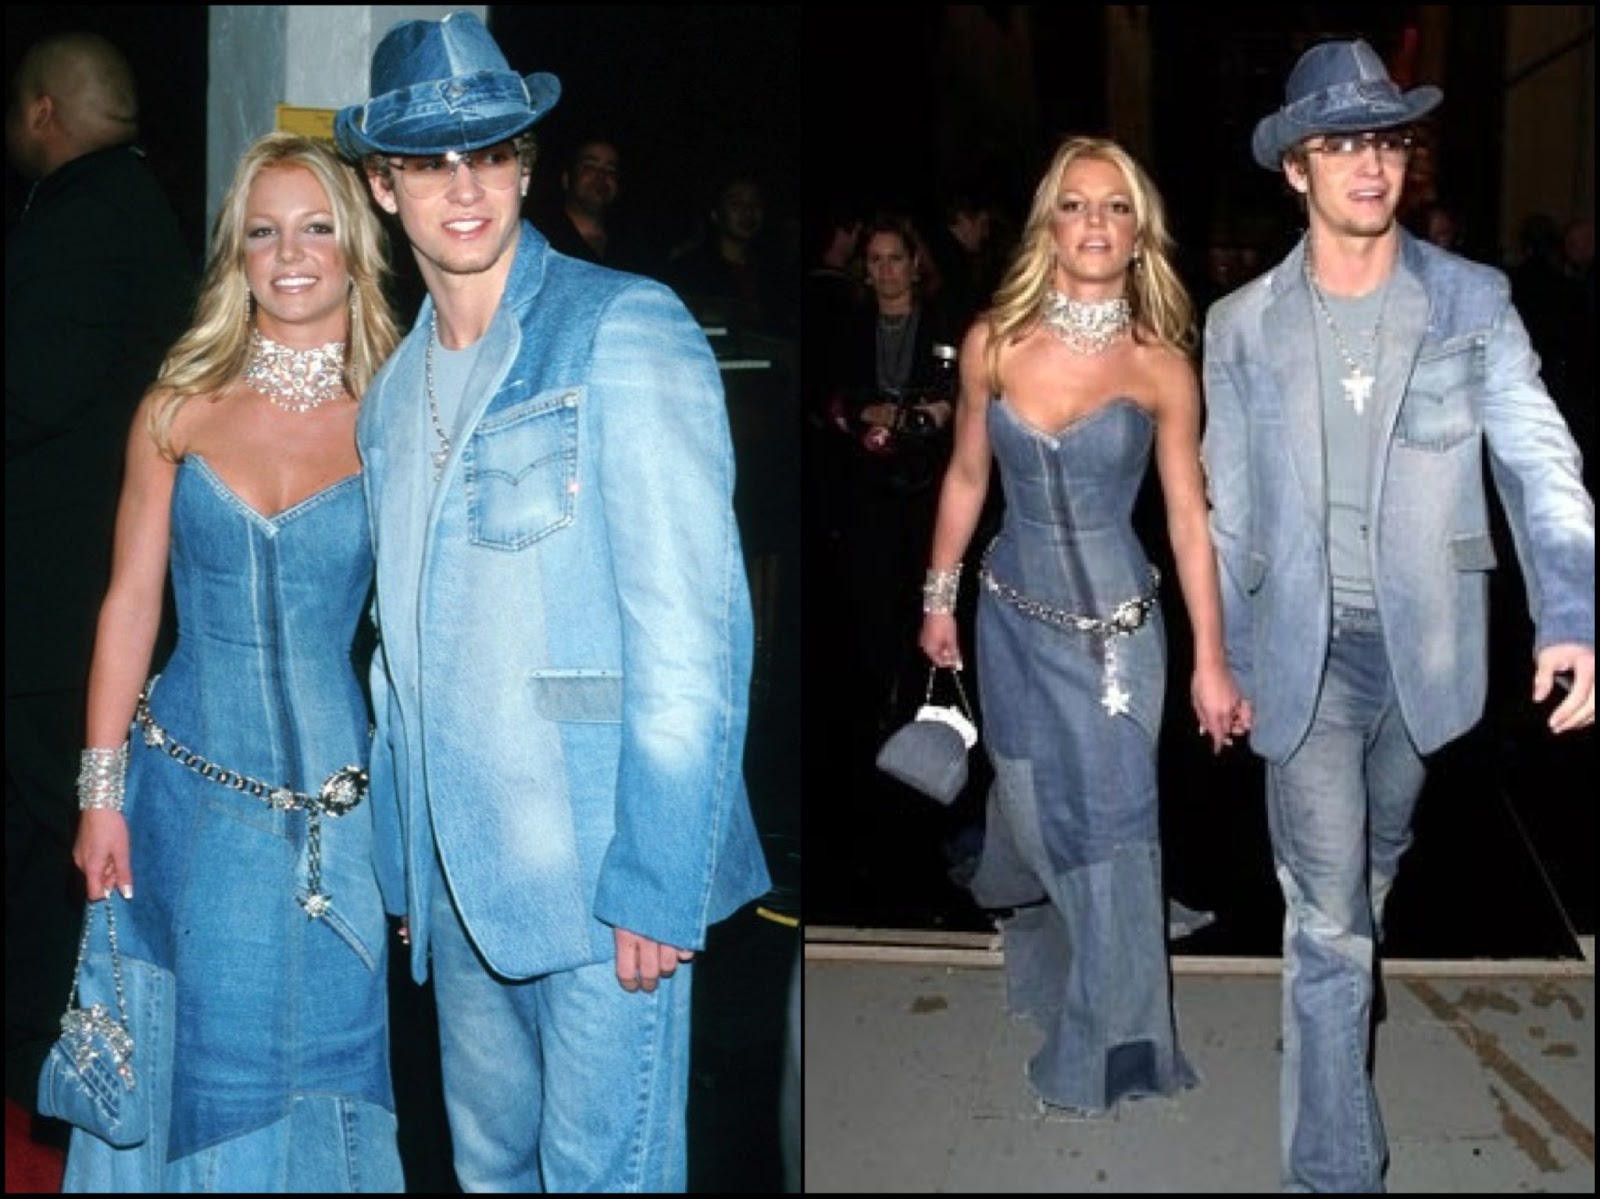 Britney and Justin in denim at 2001 AMA